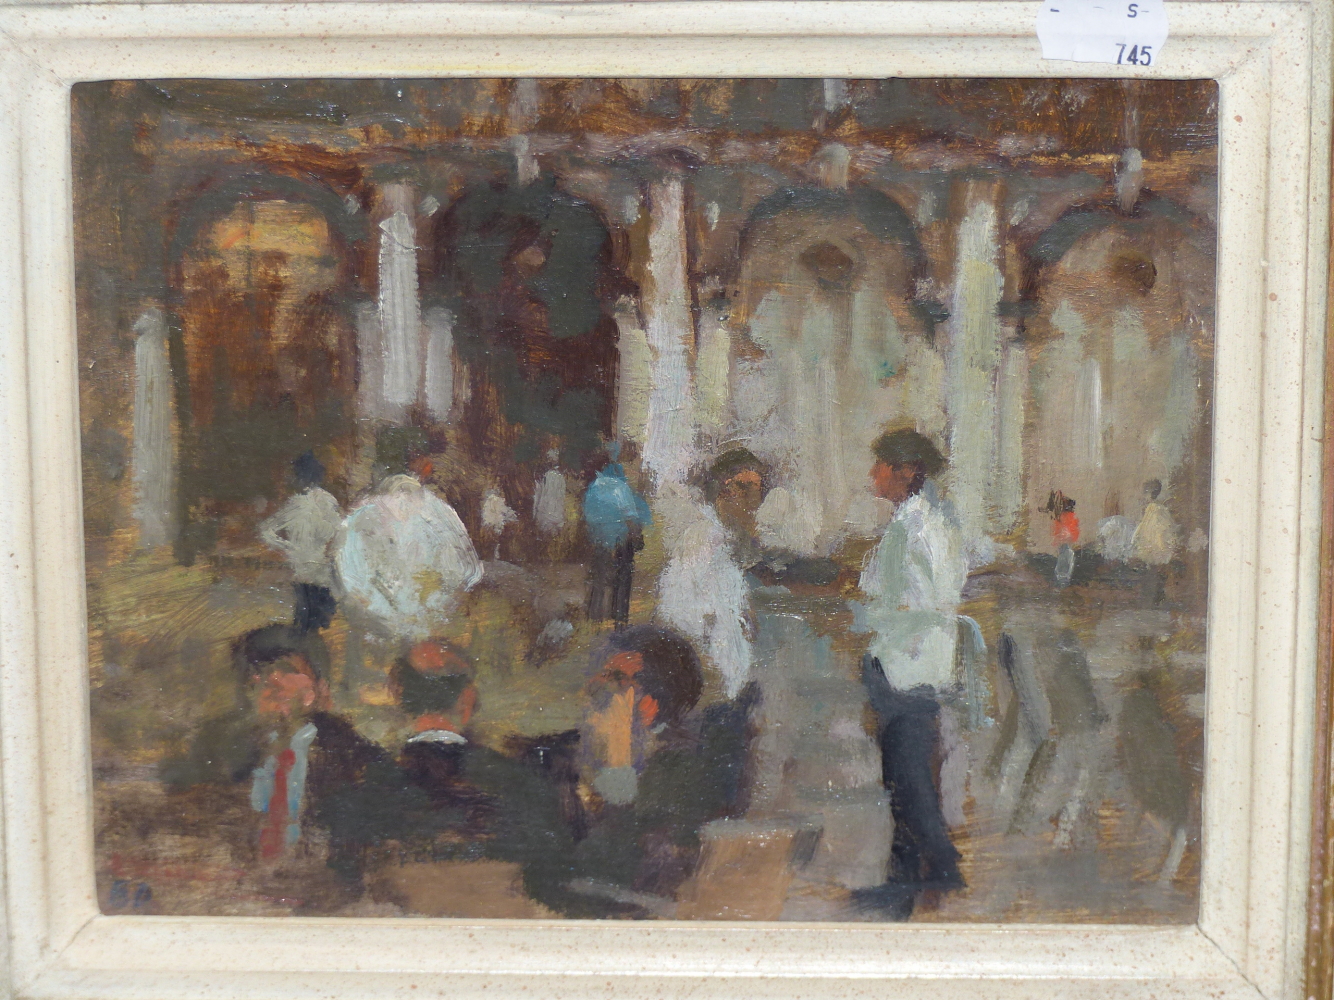 BERNARD DUNSTAN (1920-2017). ARR. WAITERS AT FLORIANS, INITIALLED OIL ON BOARD, INSCRIBED VERSO WITH